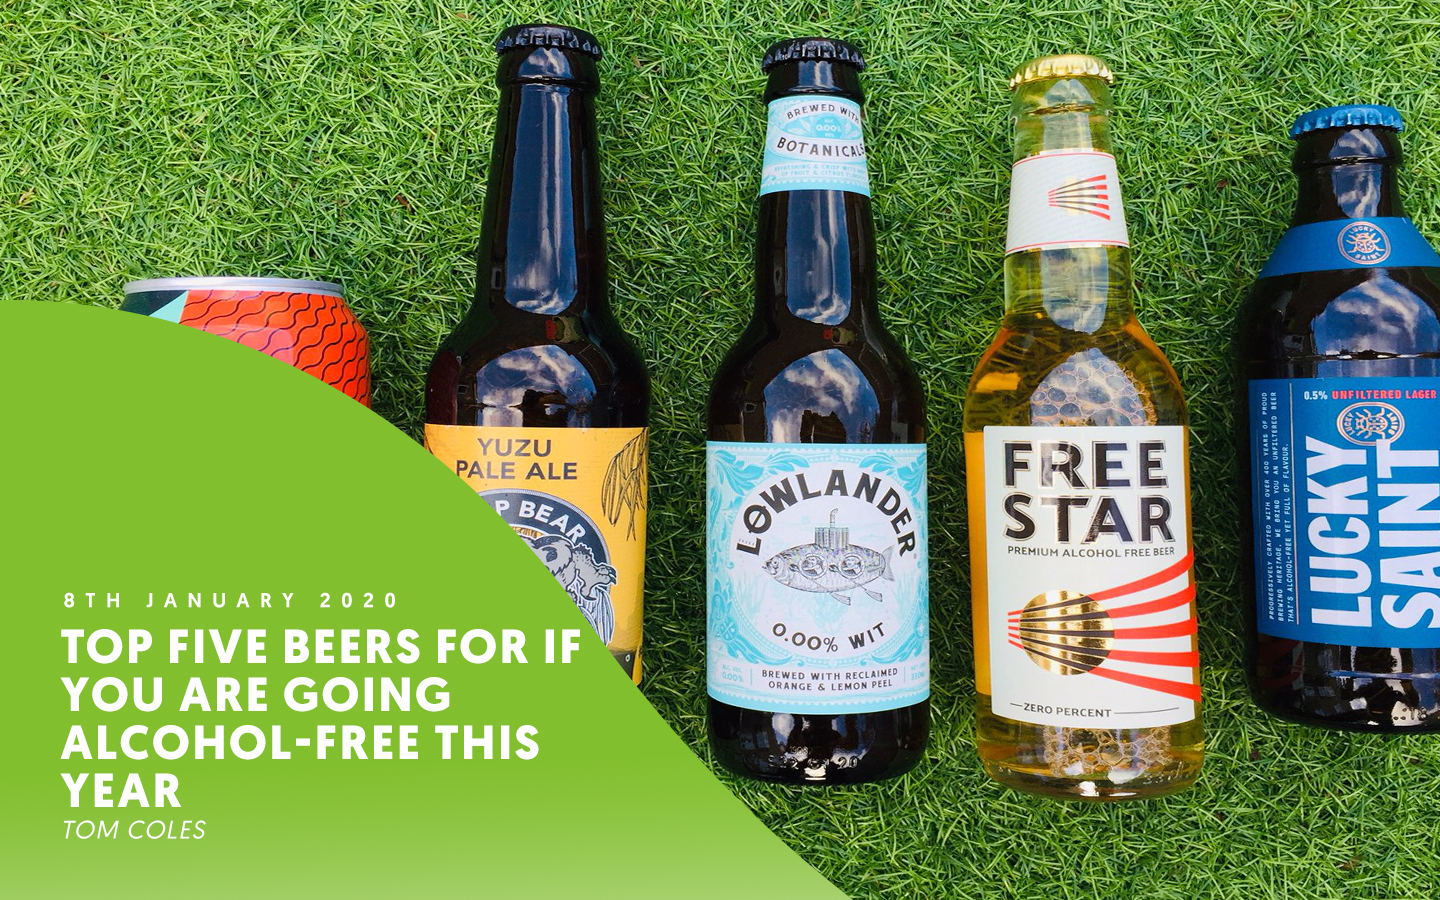 Top five beers for if you are going alcohol-free this year – by Tom Coles